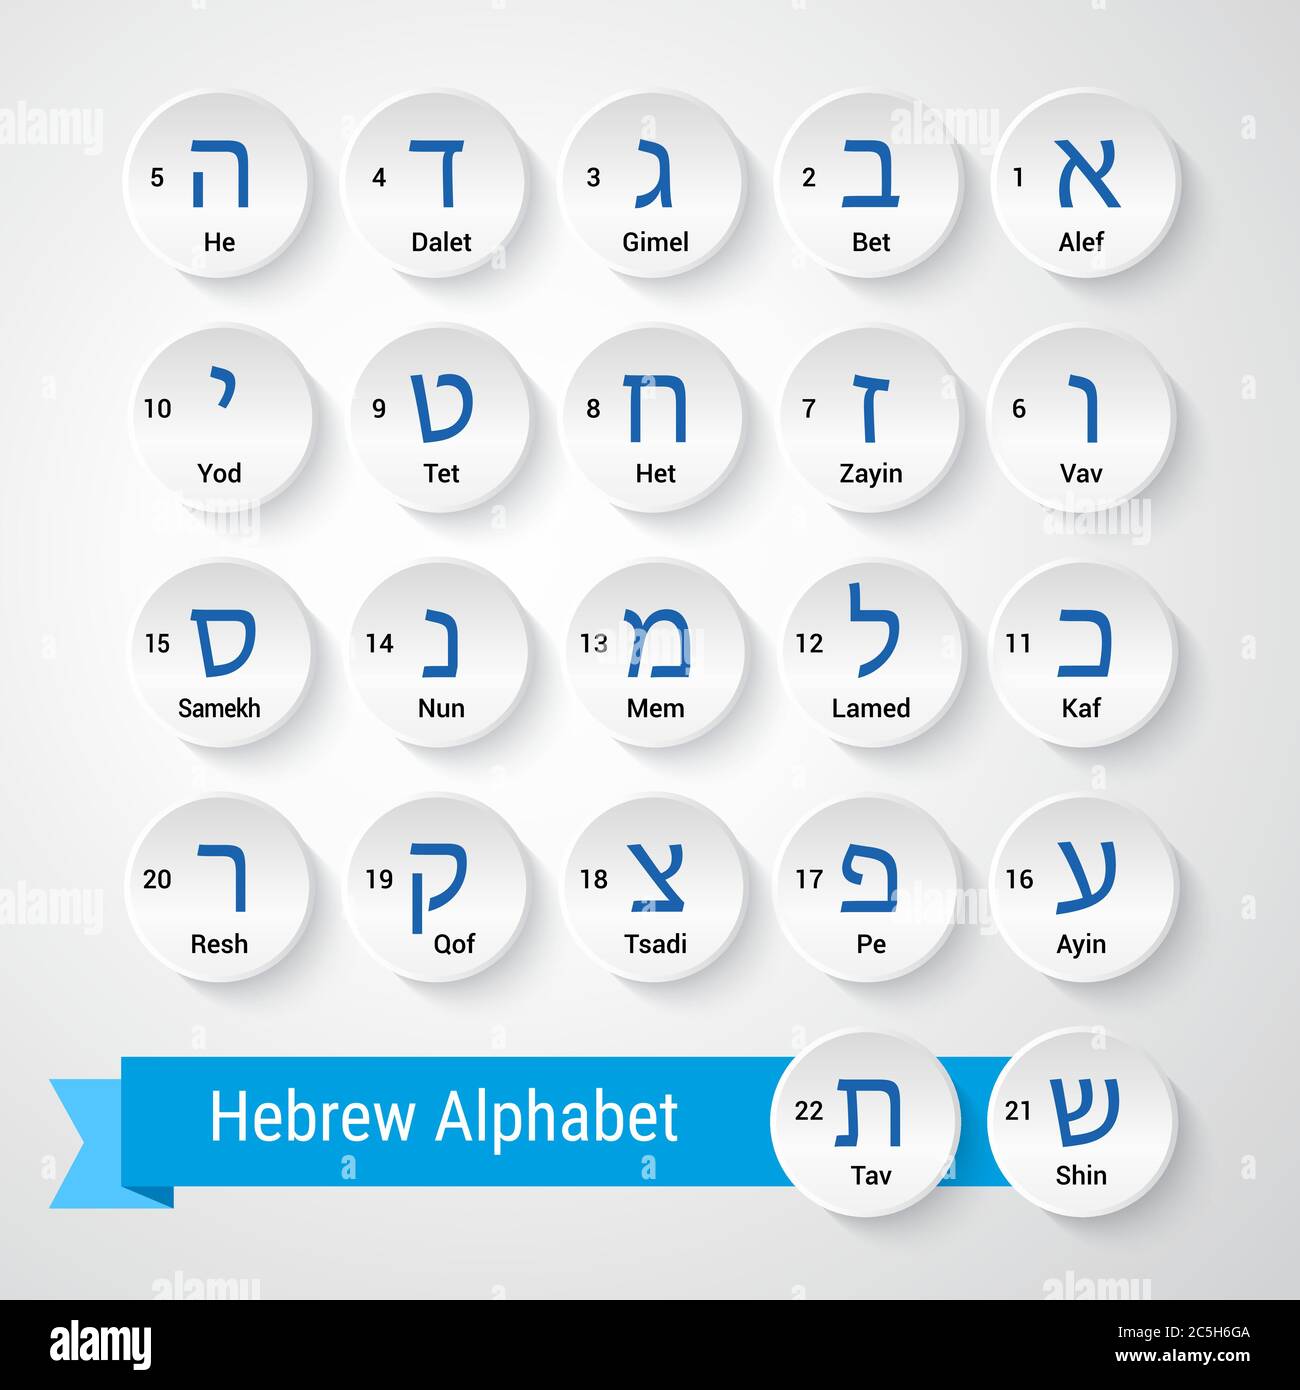 Letters of Hebrew alphabet with names in english and sequence numbers. Vector illustration. Stock Vector